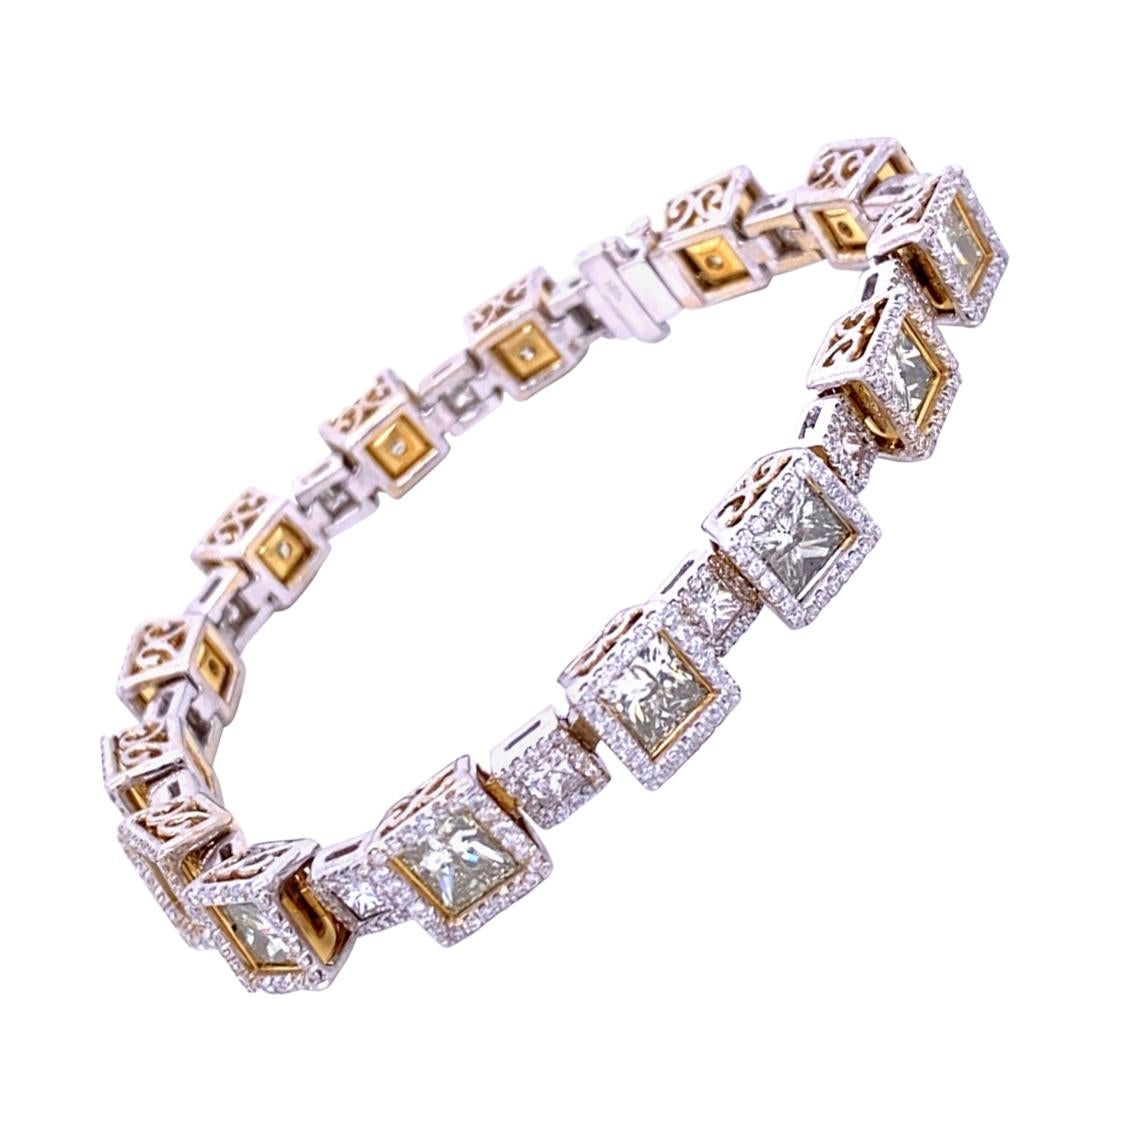 This beautiful 18K Gold Diamond Tennis Bracelet  consists of 14 Large and 15 Small links set with Princess Cut centers surrounded by pave set Halo. 
Total Weight of Large diamonds: 13.81 Ct
Total Weight of small diamonds (Pave Rounds): 3.85 Ct
Total